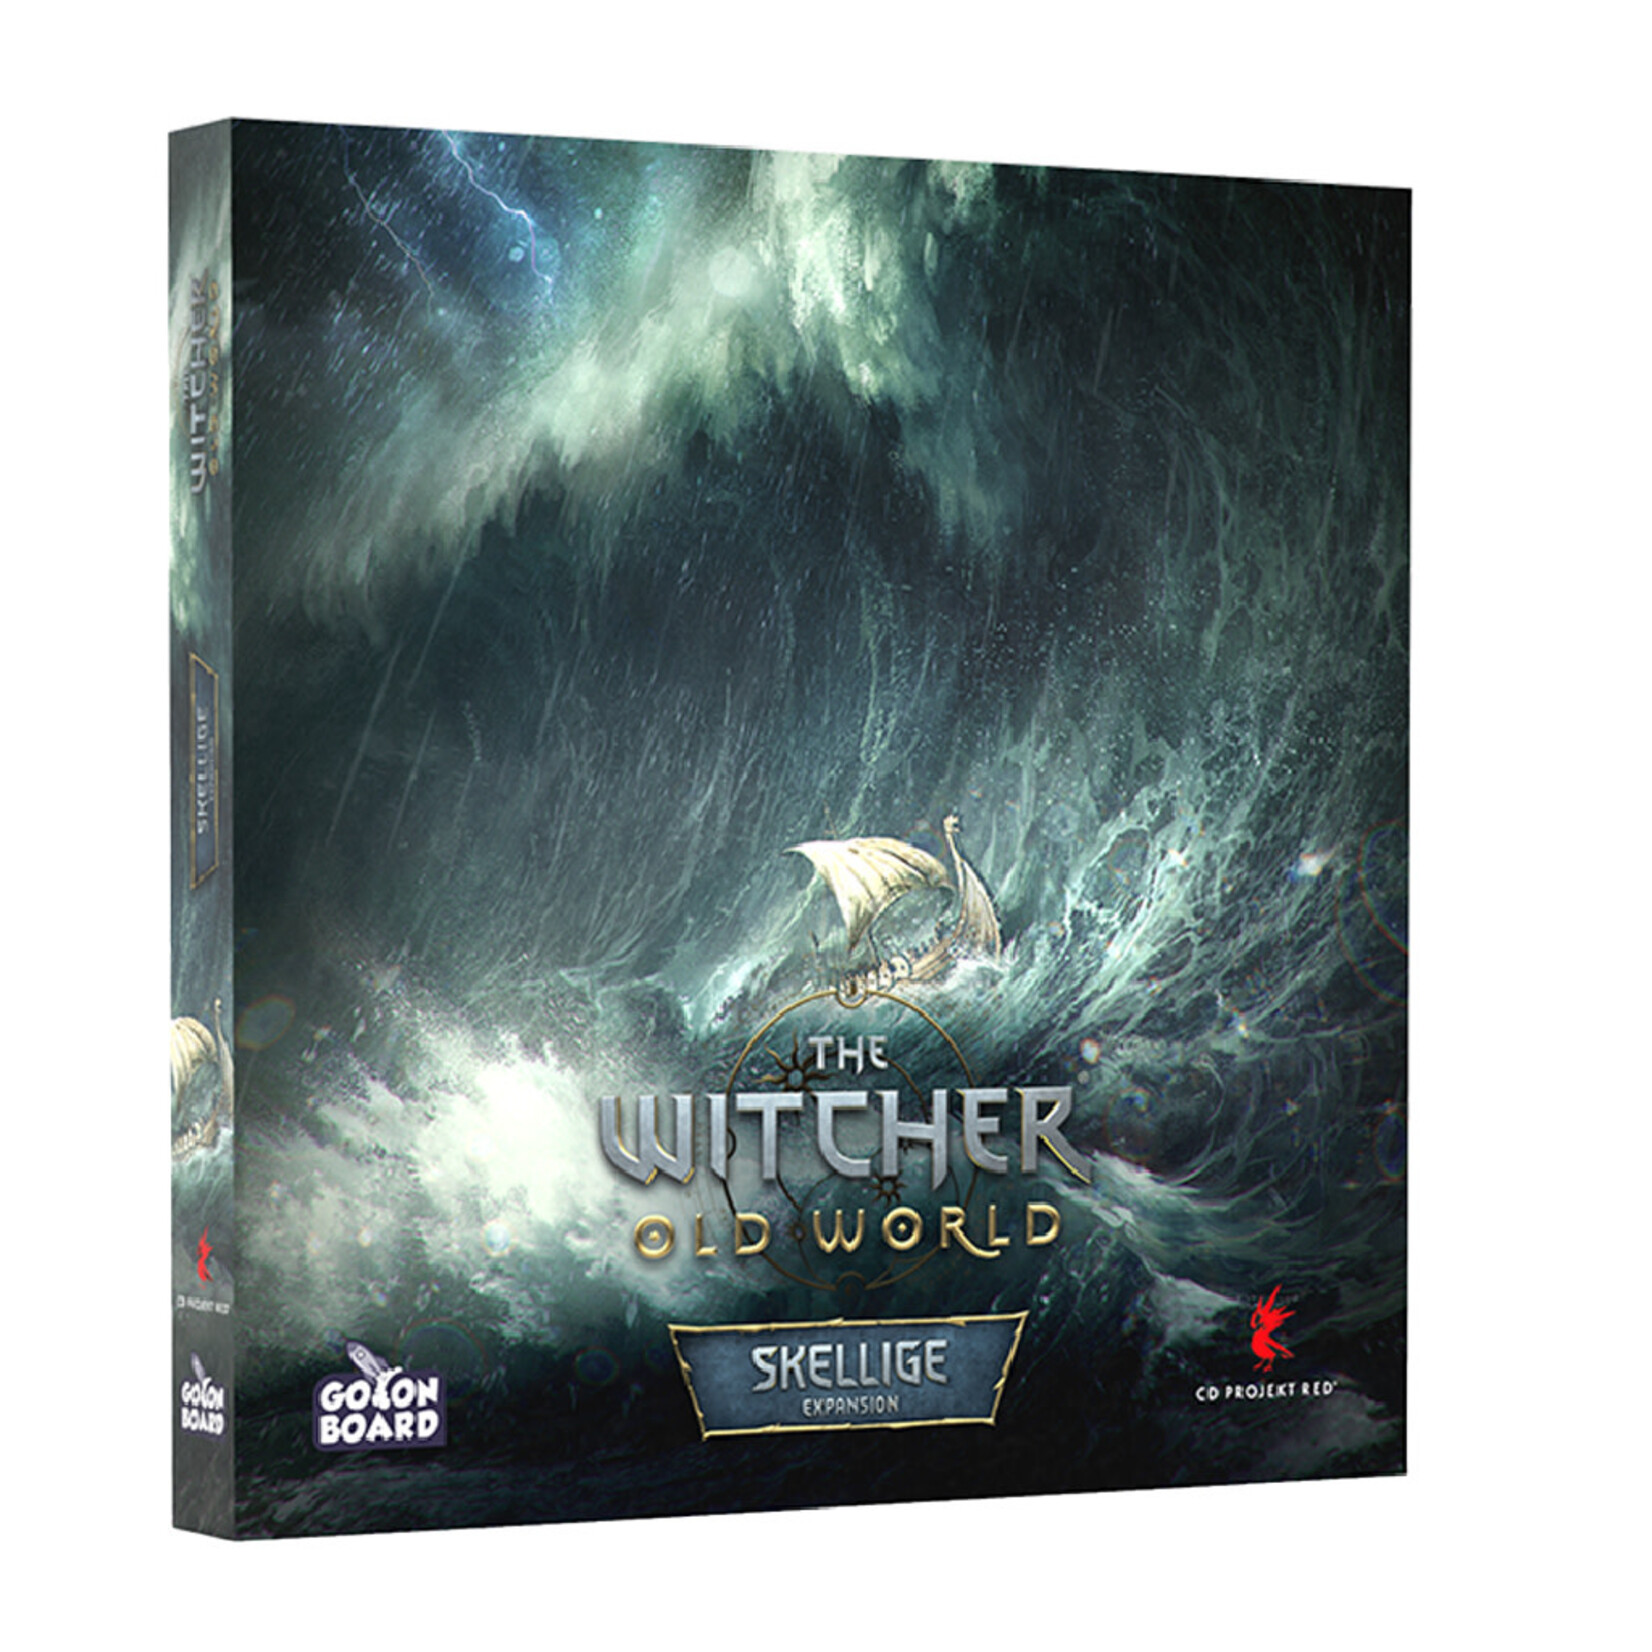 Go On Board The Witcher: Old World - Skellige Expansion